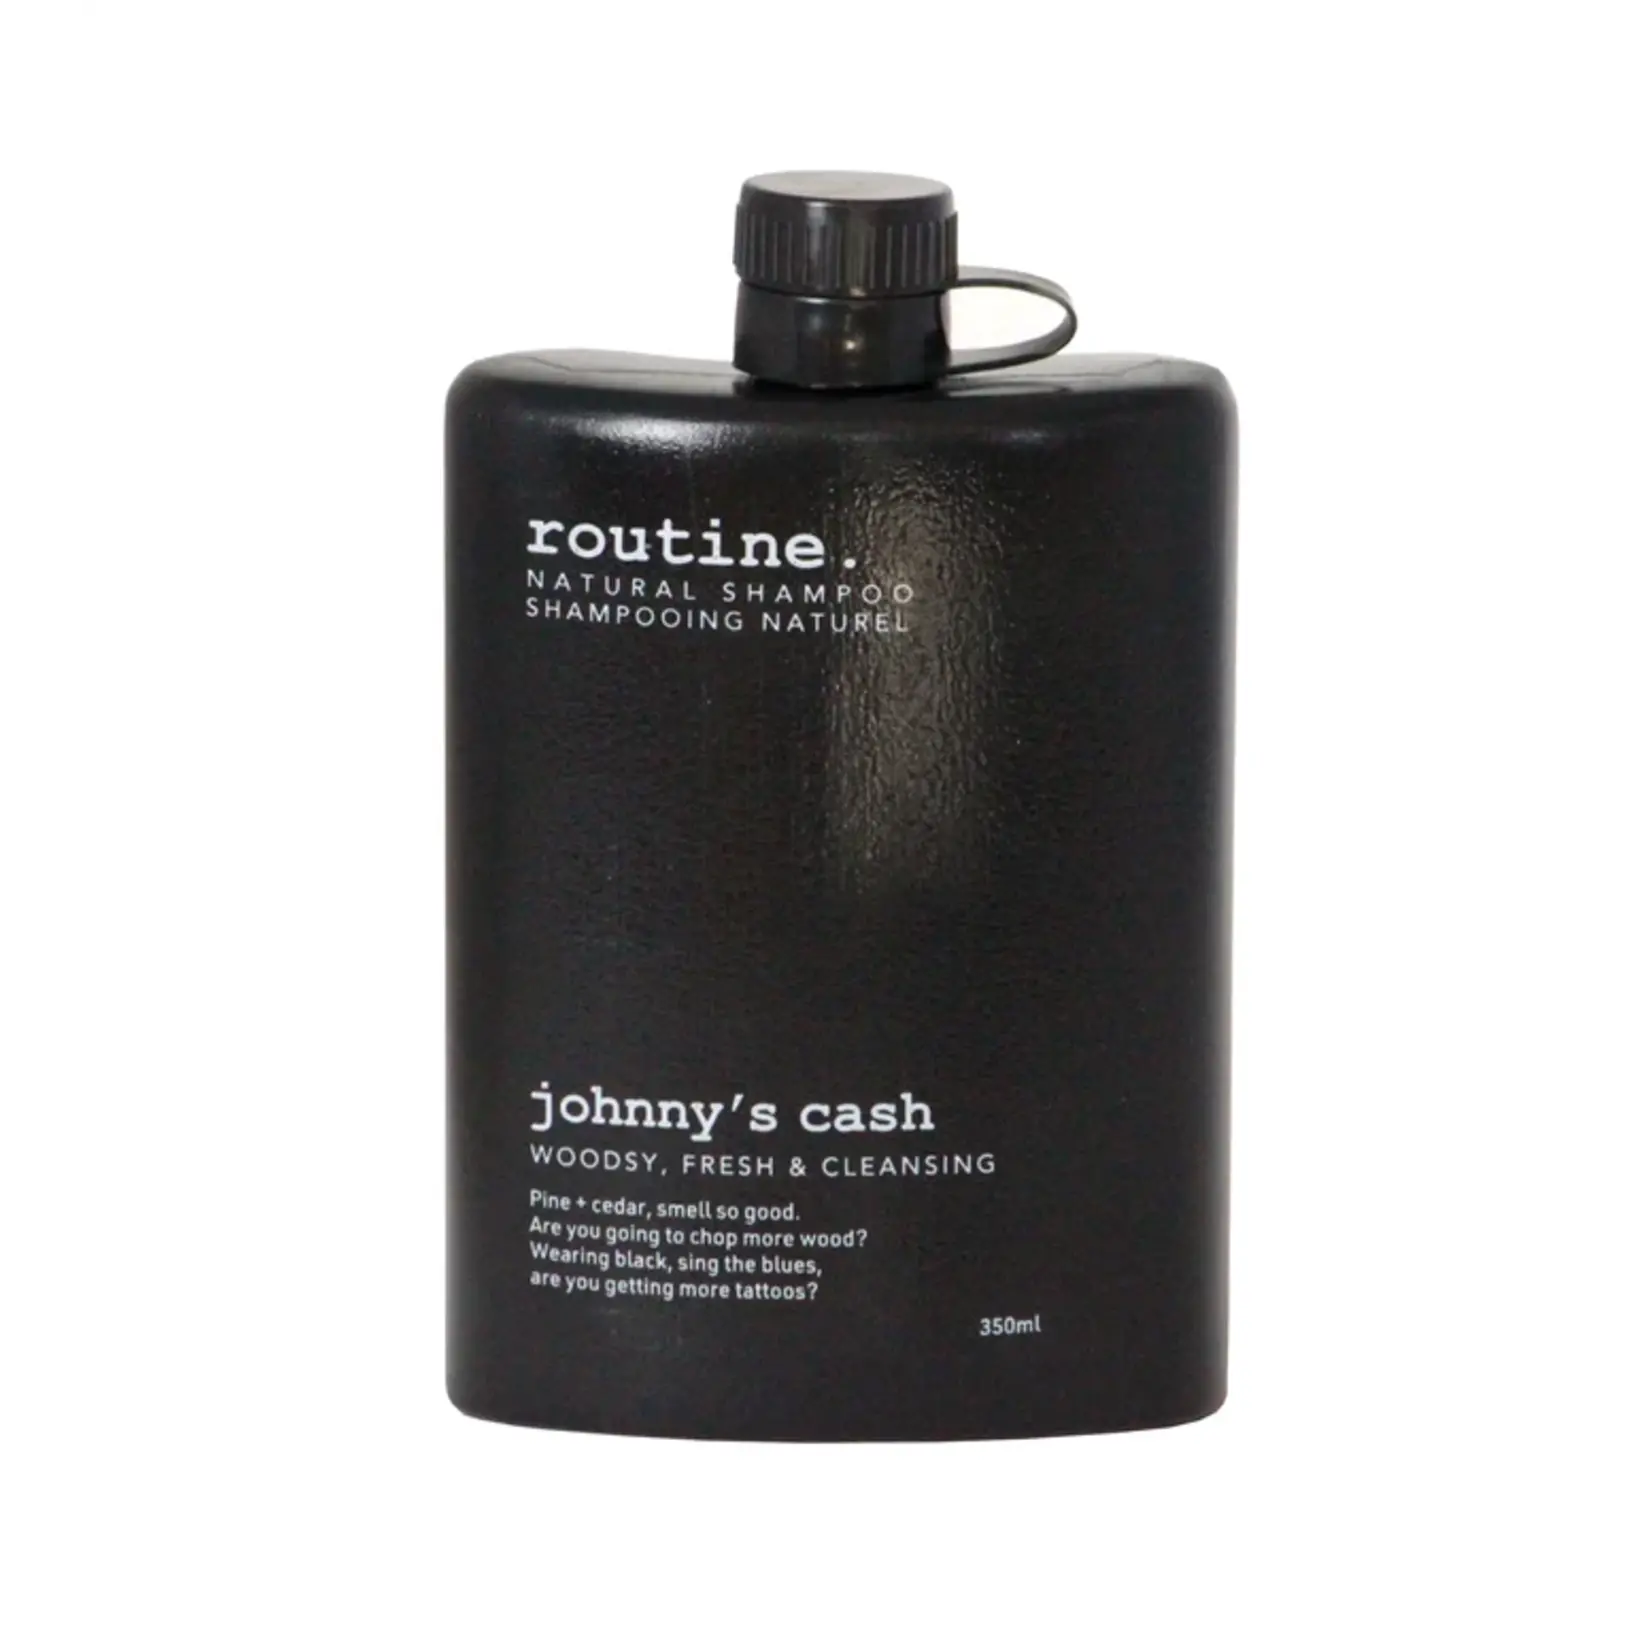 Routine Natural Scents Johnny's Cash Shampoo